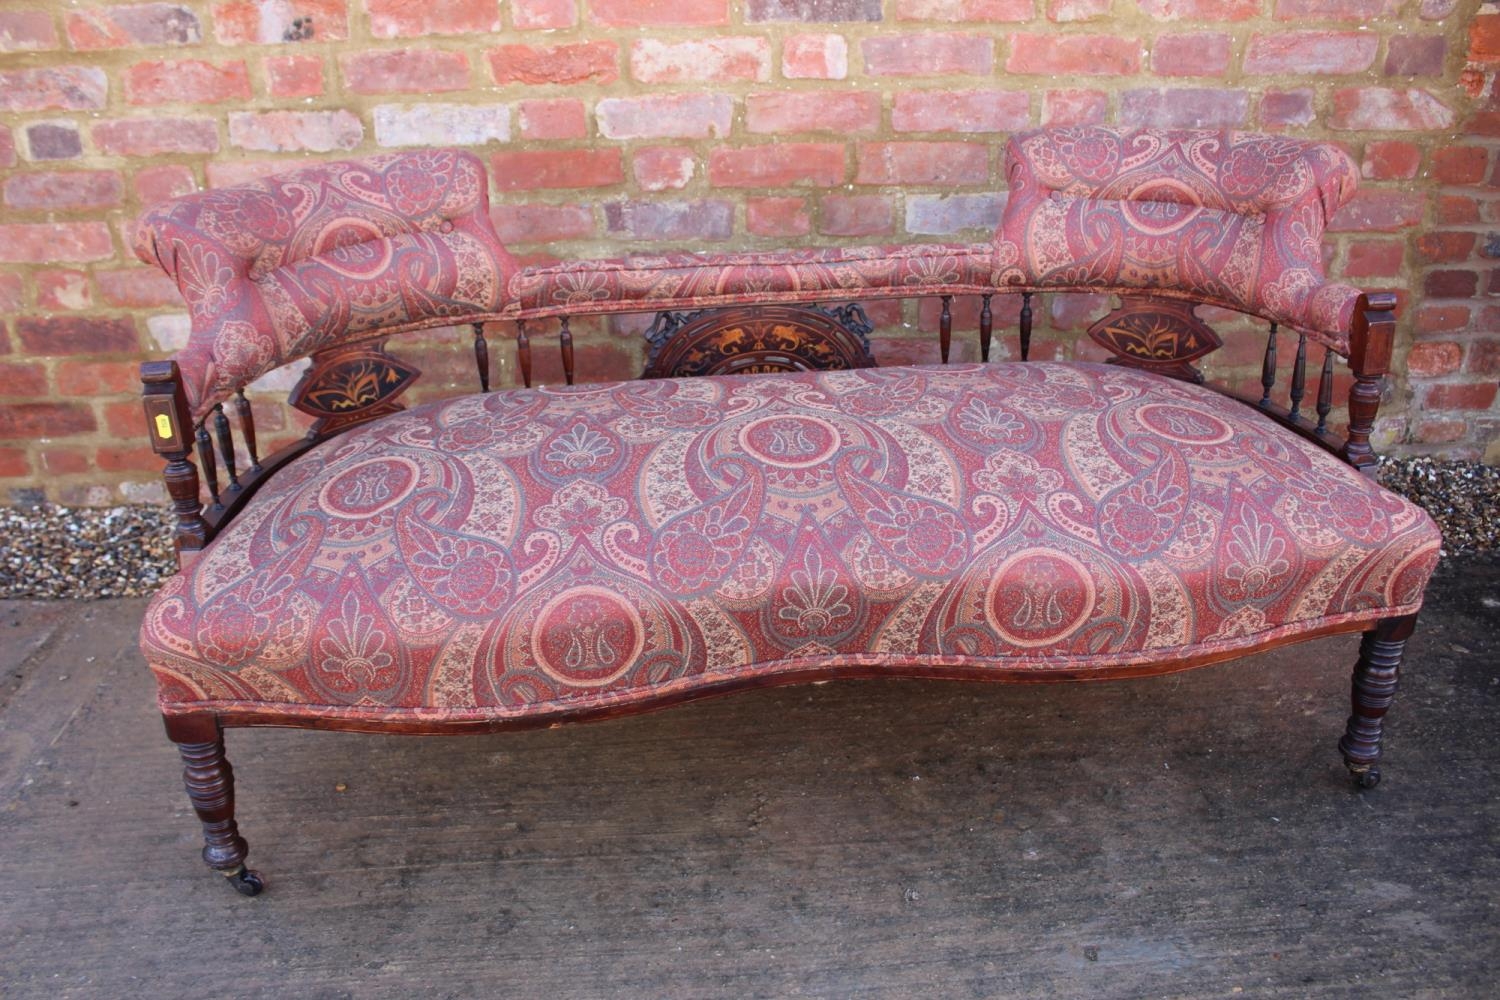 An early 20th century rosewood and line inlaid "conversation" settee with splat and spindle padded